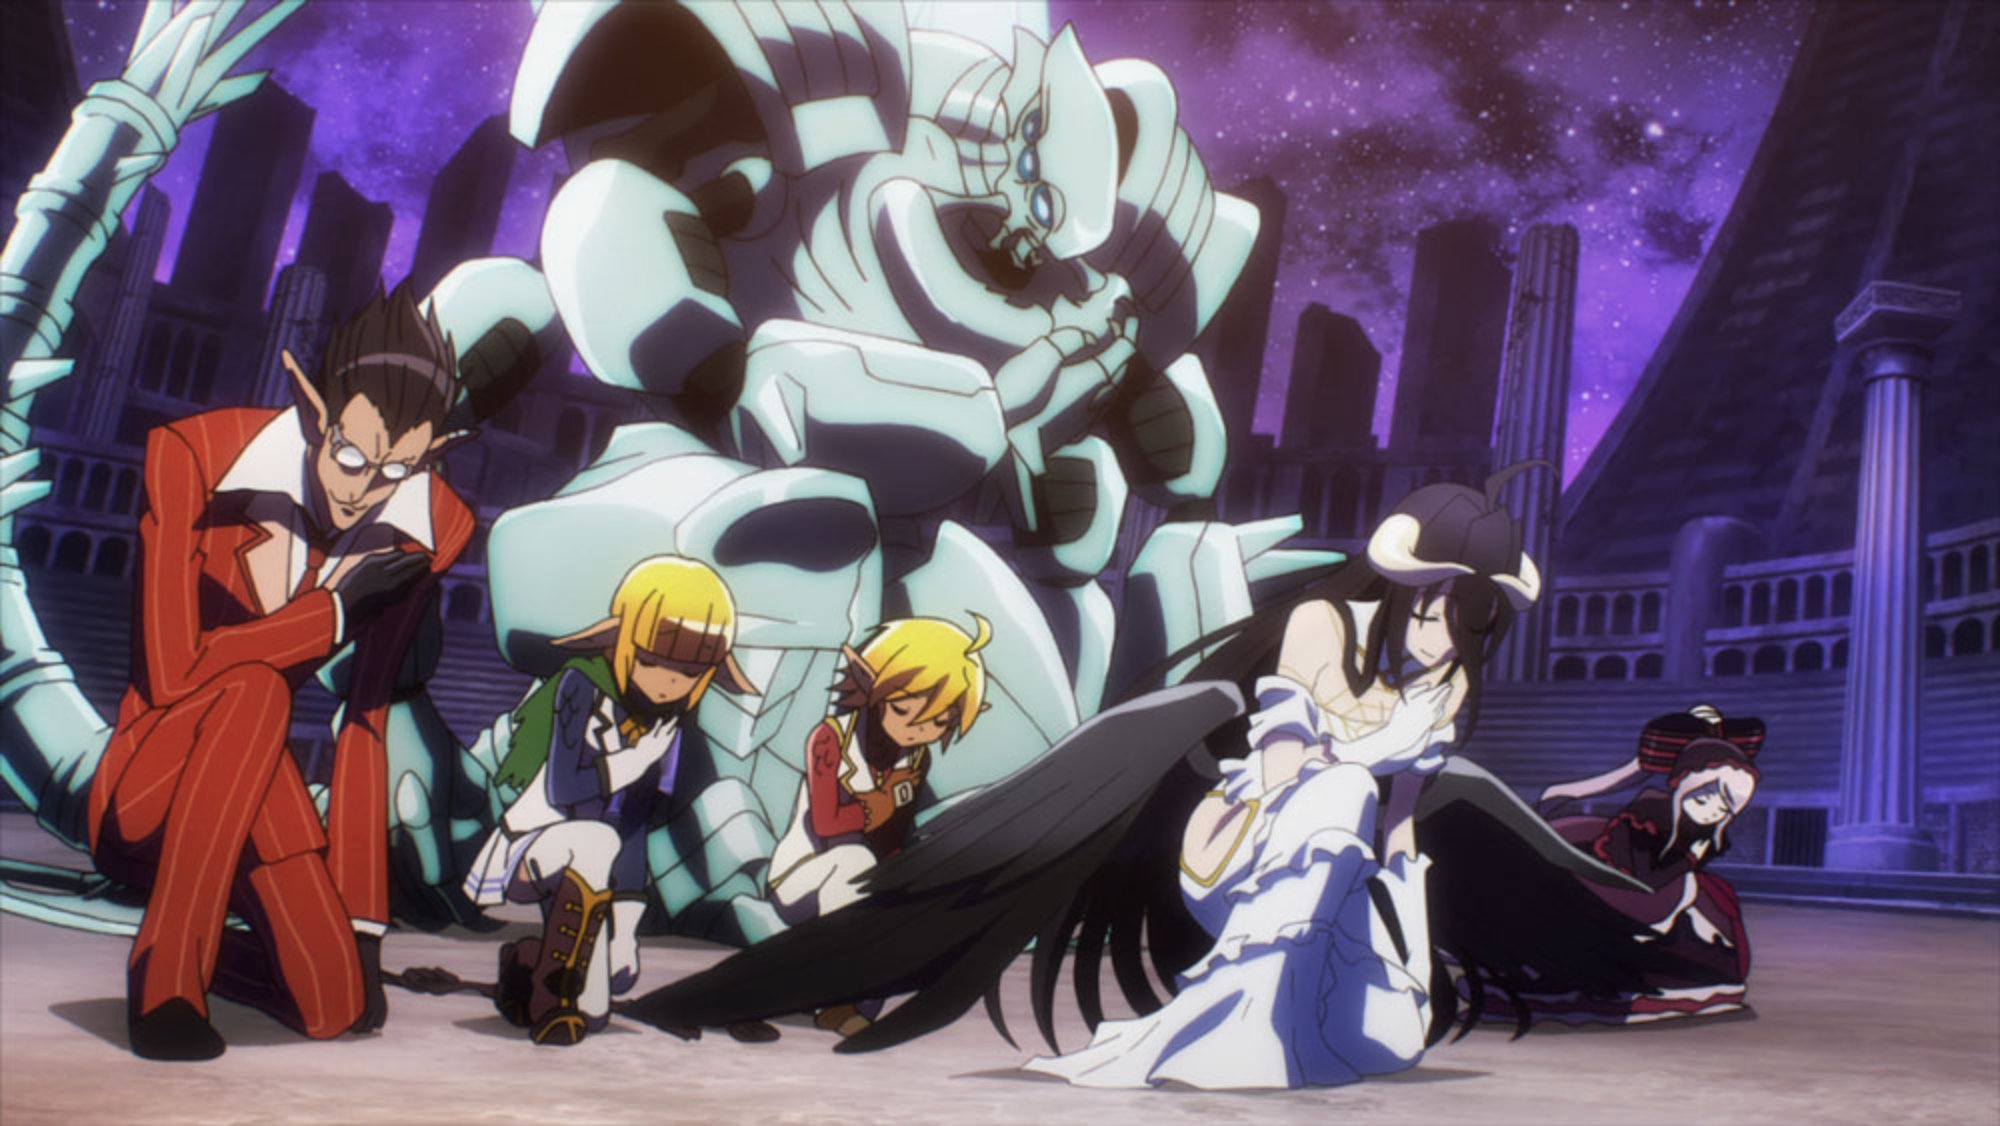 Overlord IV (Season 4) Episode 10 - Anime Review - DoubleSama in 2023